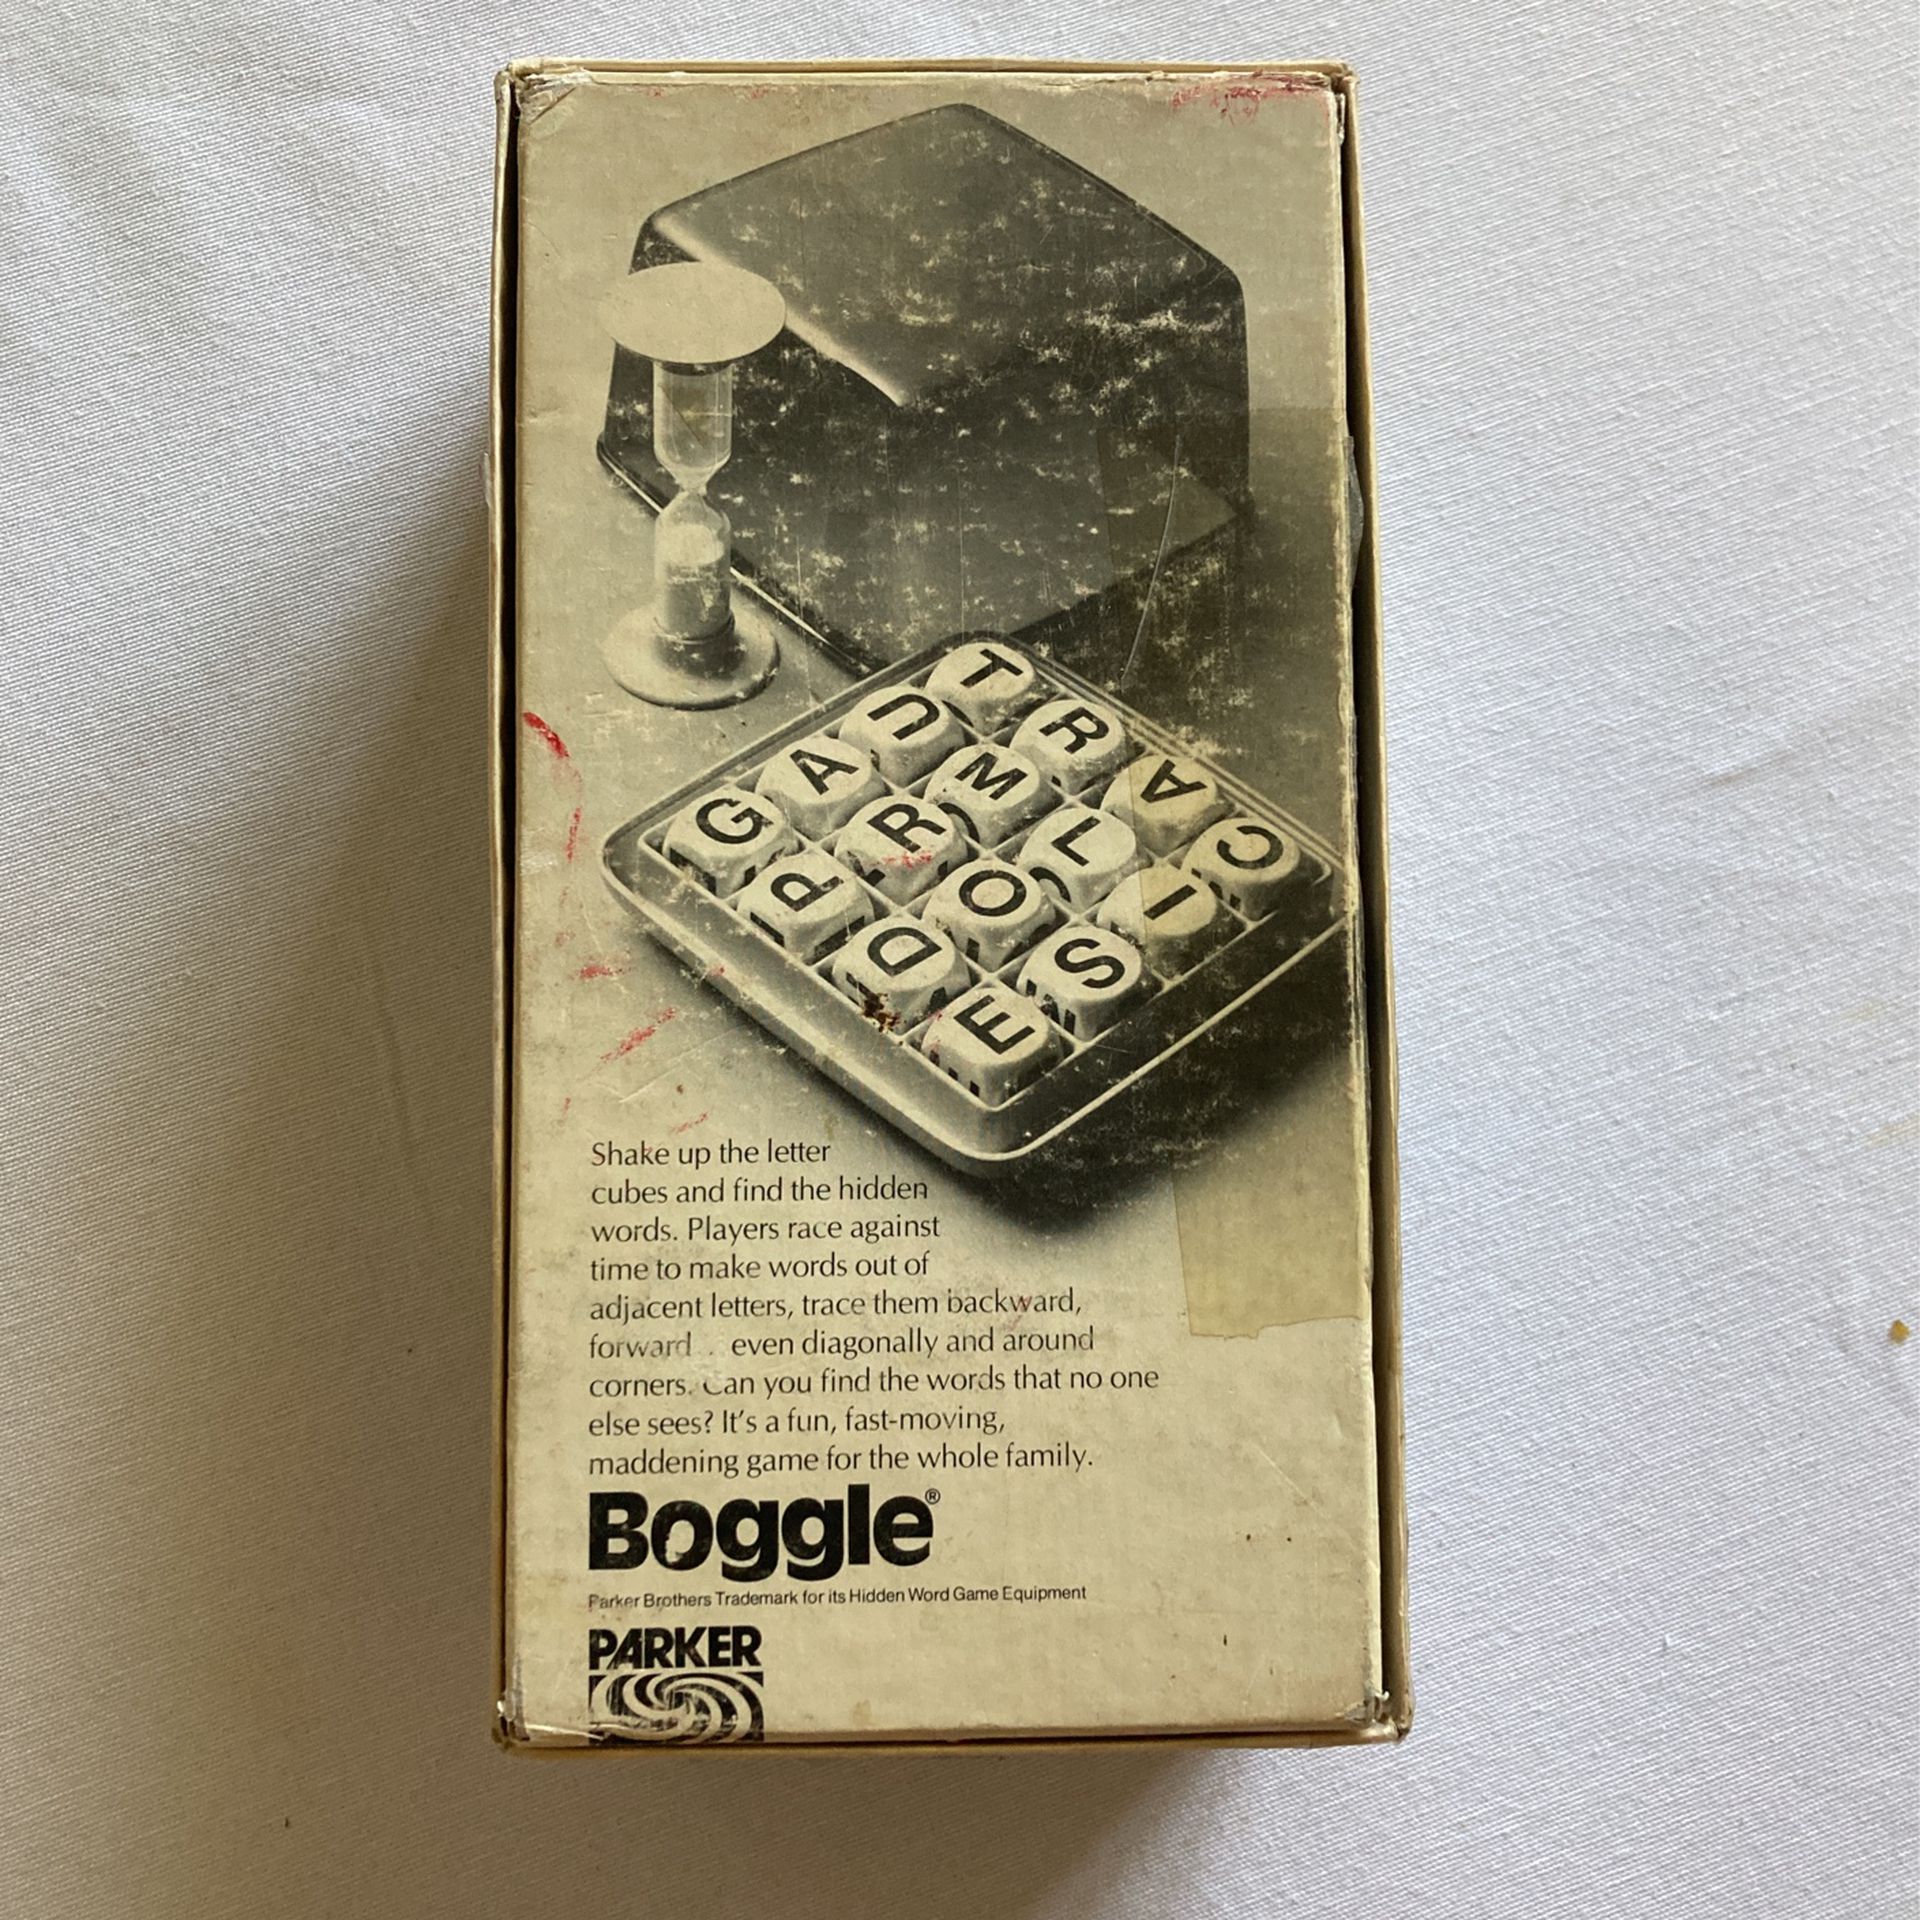 Vintage 1976 BOGGLE Word Game Complete Parker Brothers Classic Hidden Word Game